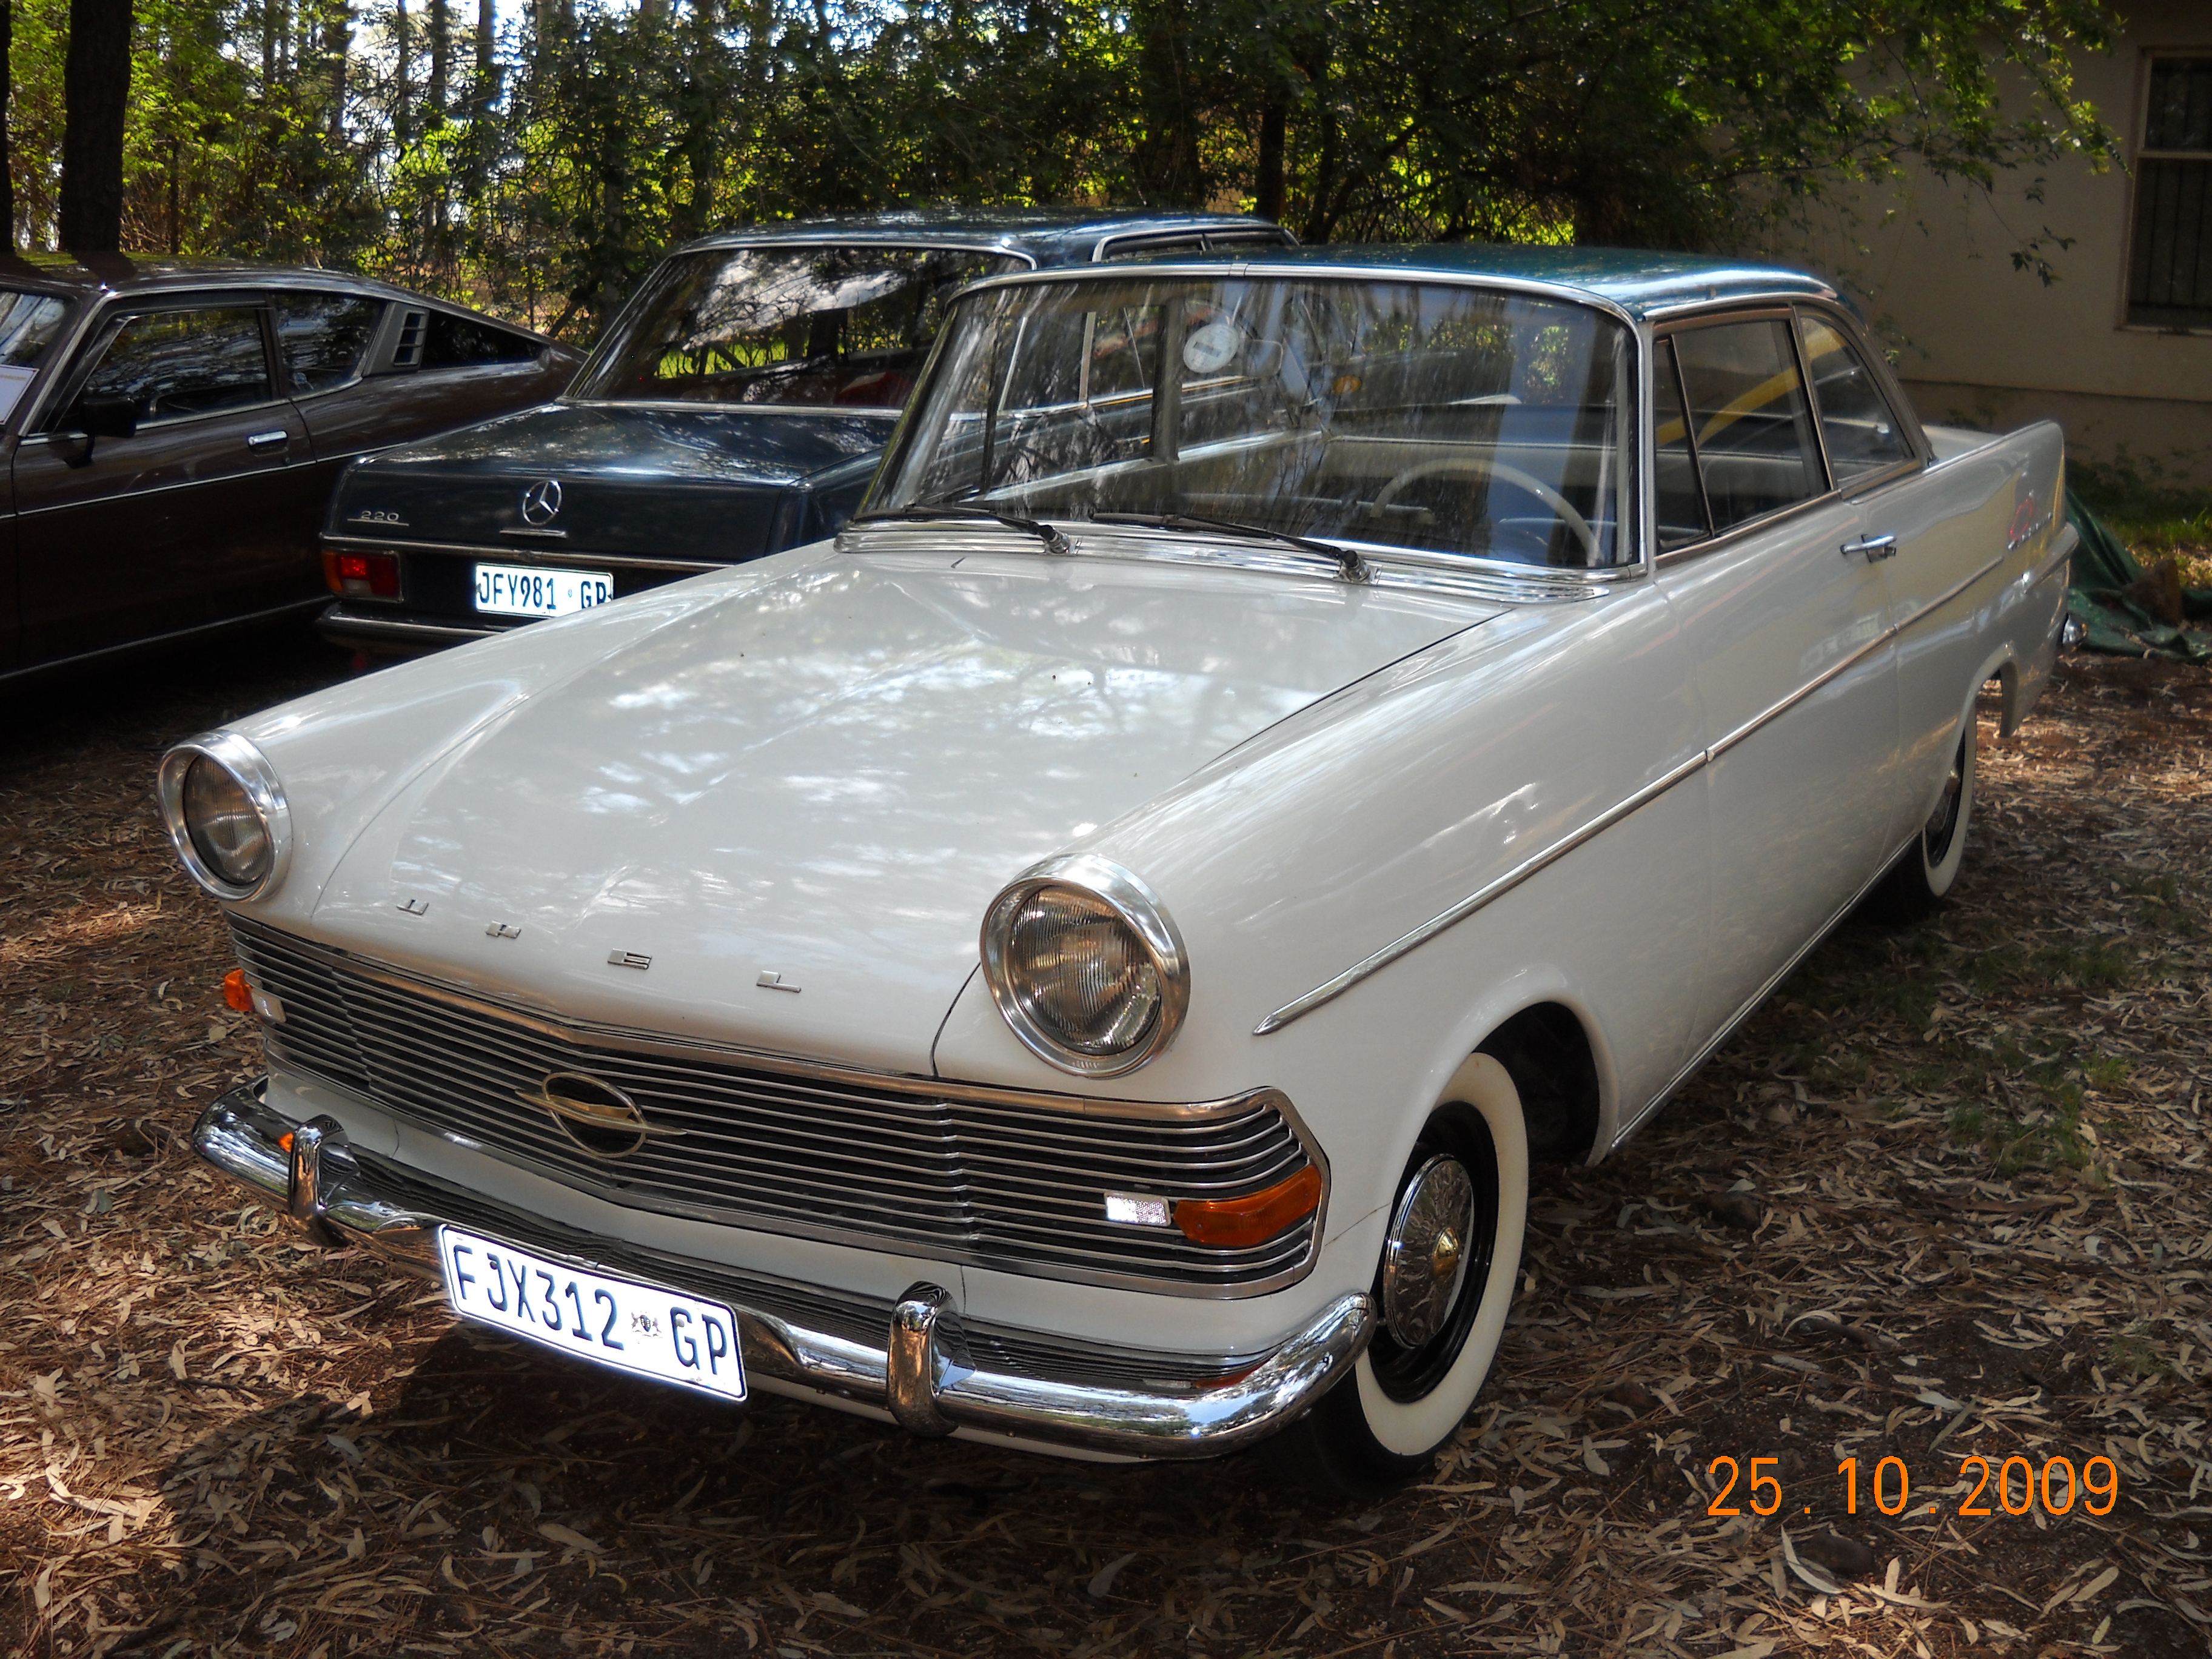 Opel Record Coupe | Flickr - Photo Sharing!